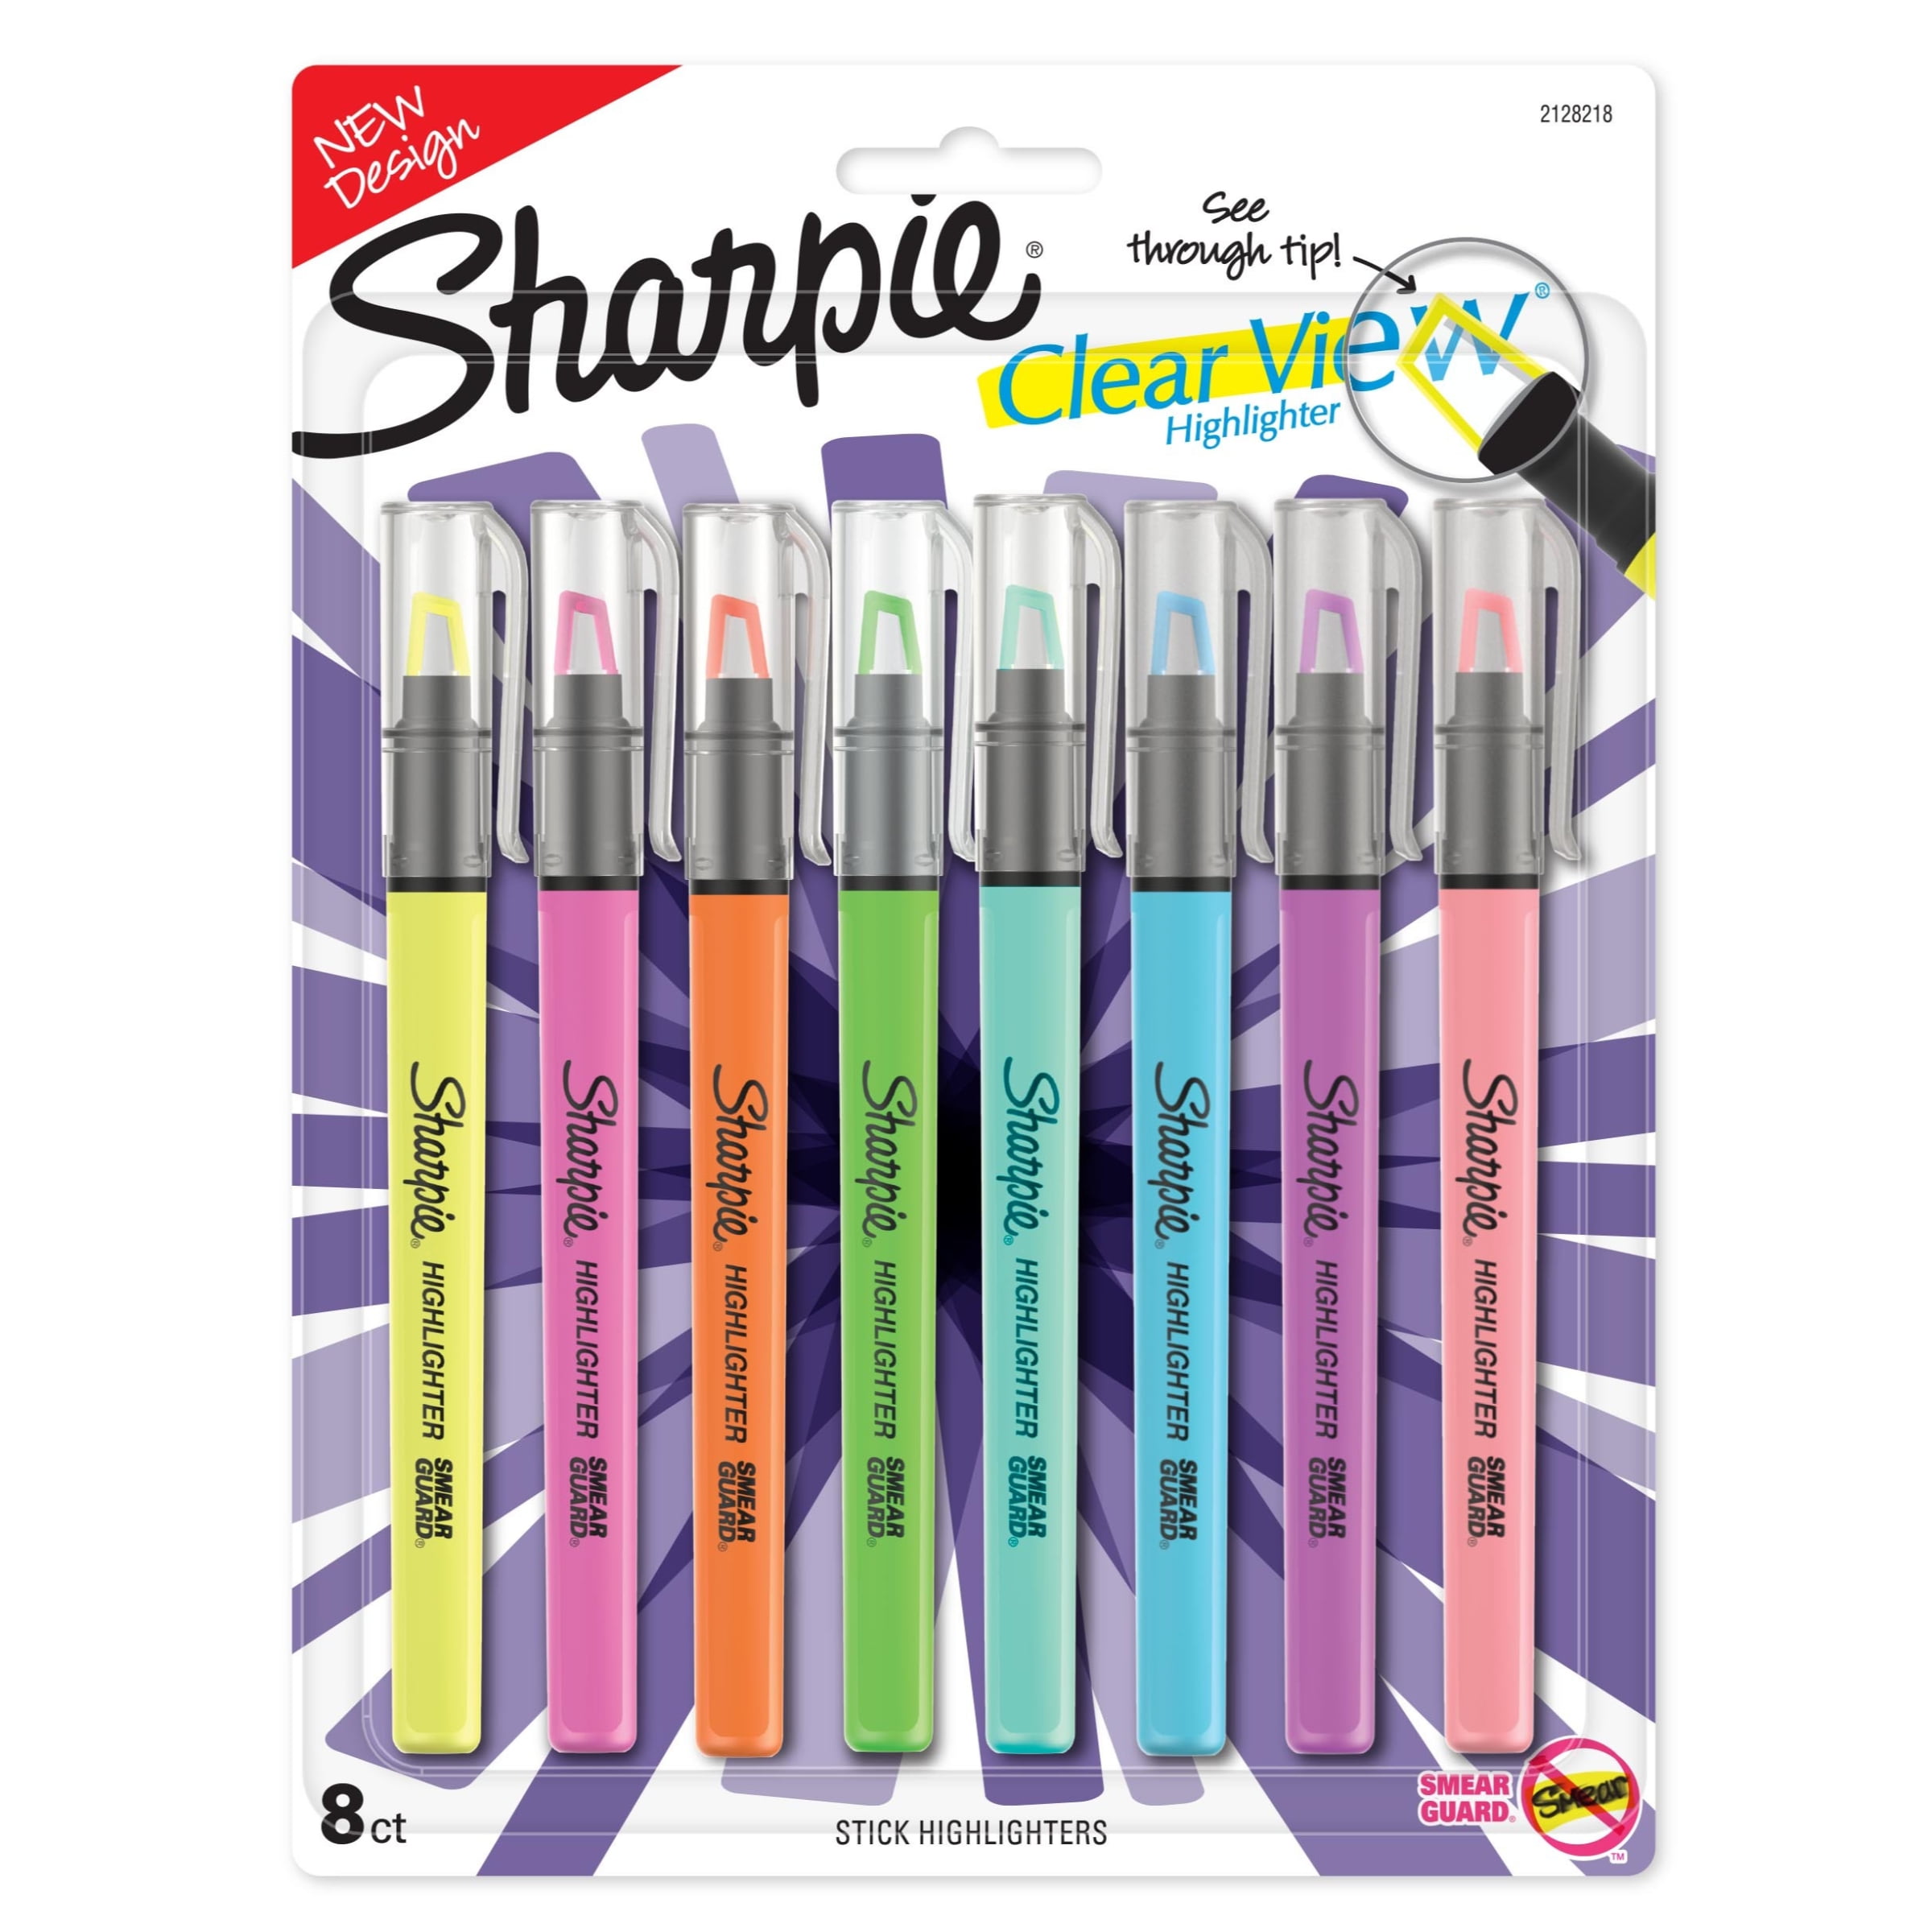 Markers & Highlighters  Online Shopping for Popular Electronics